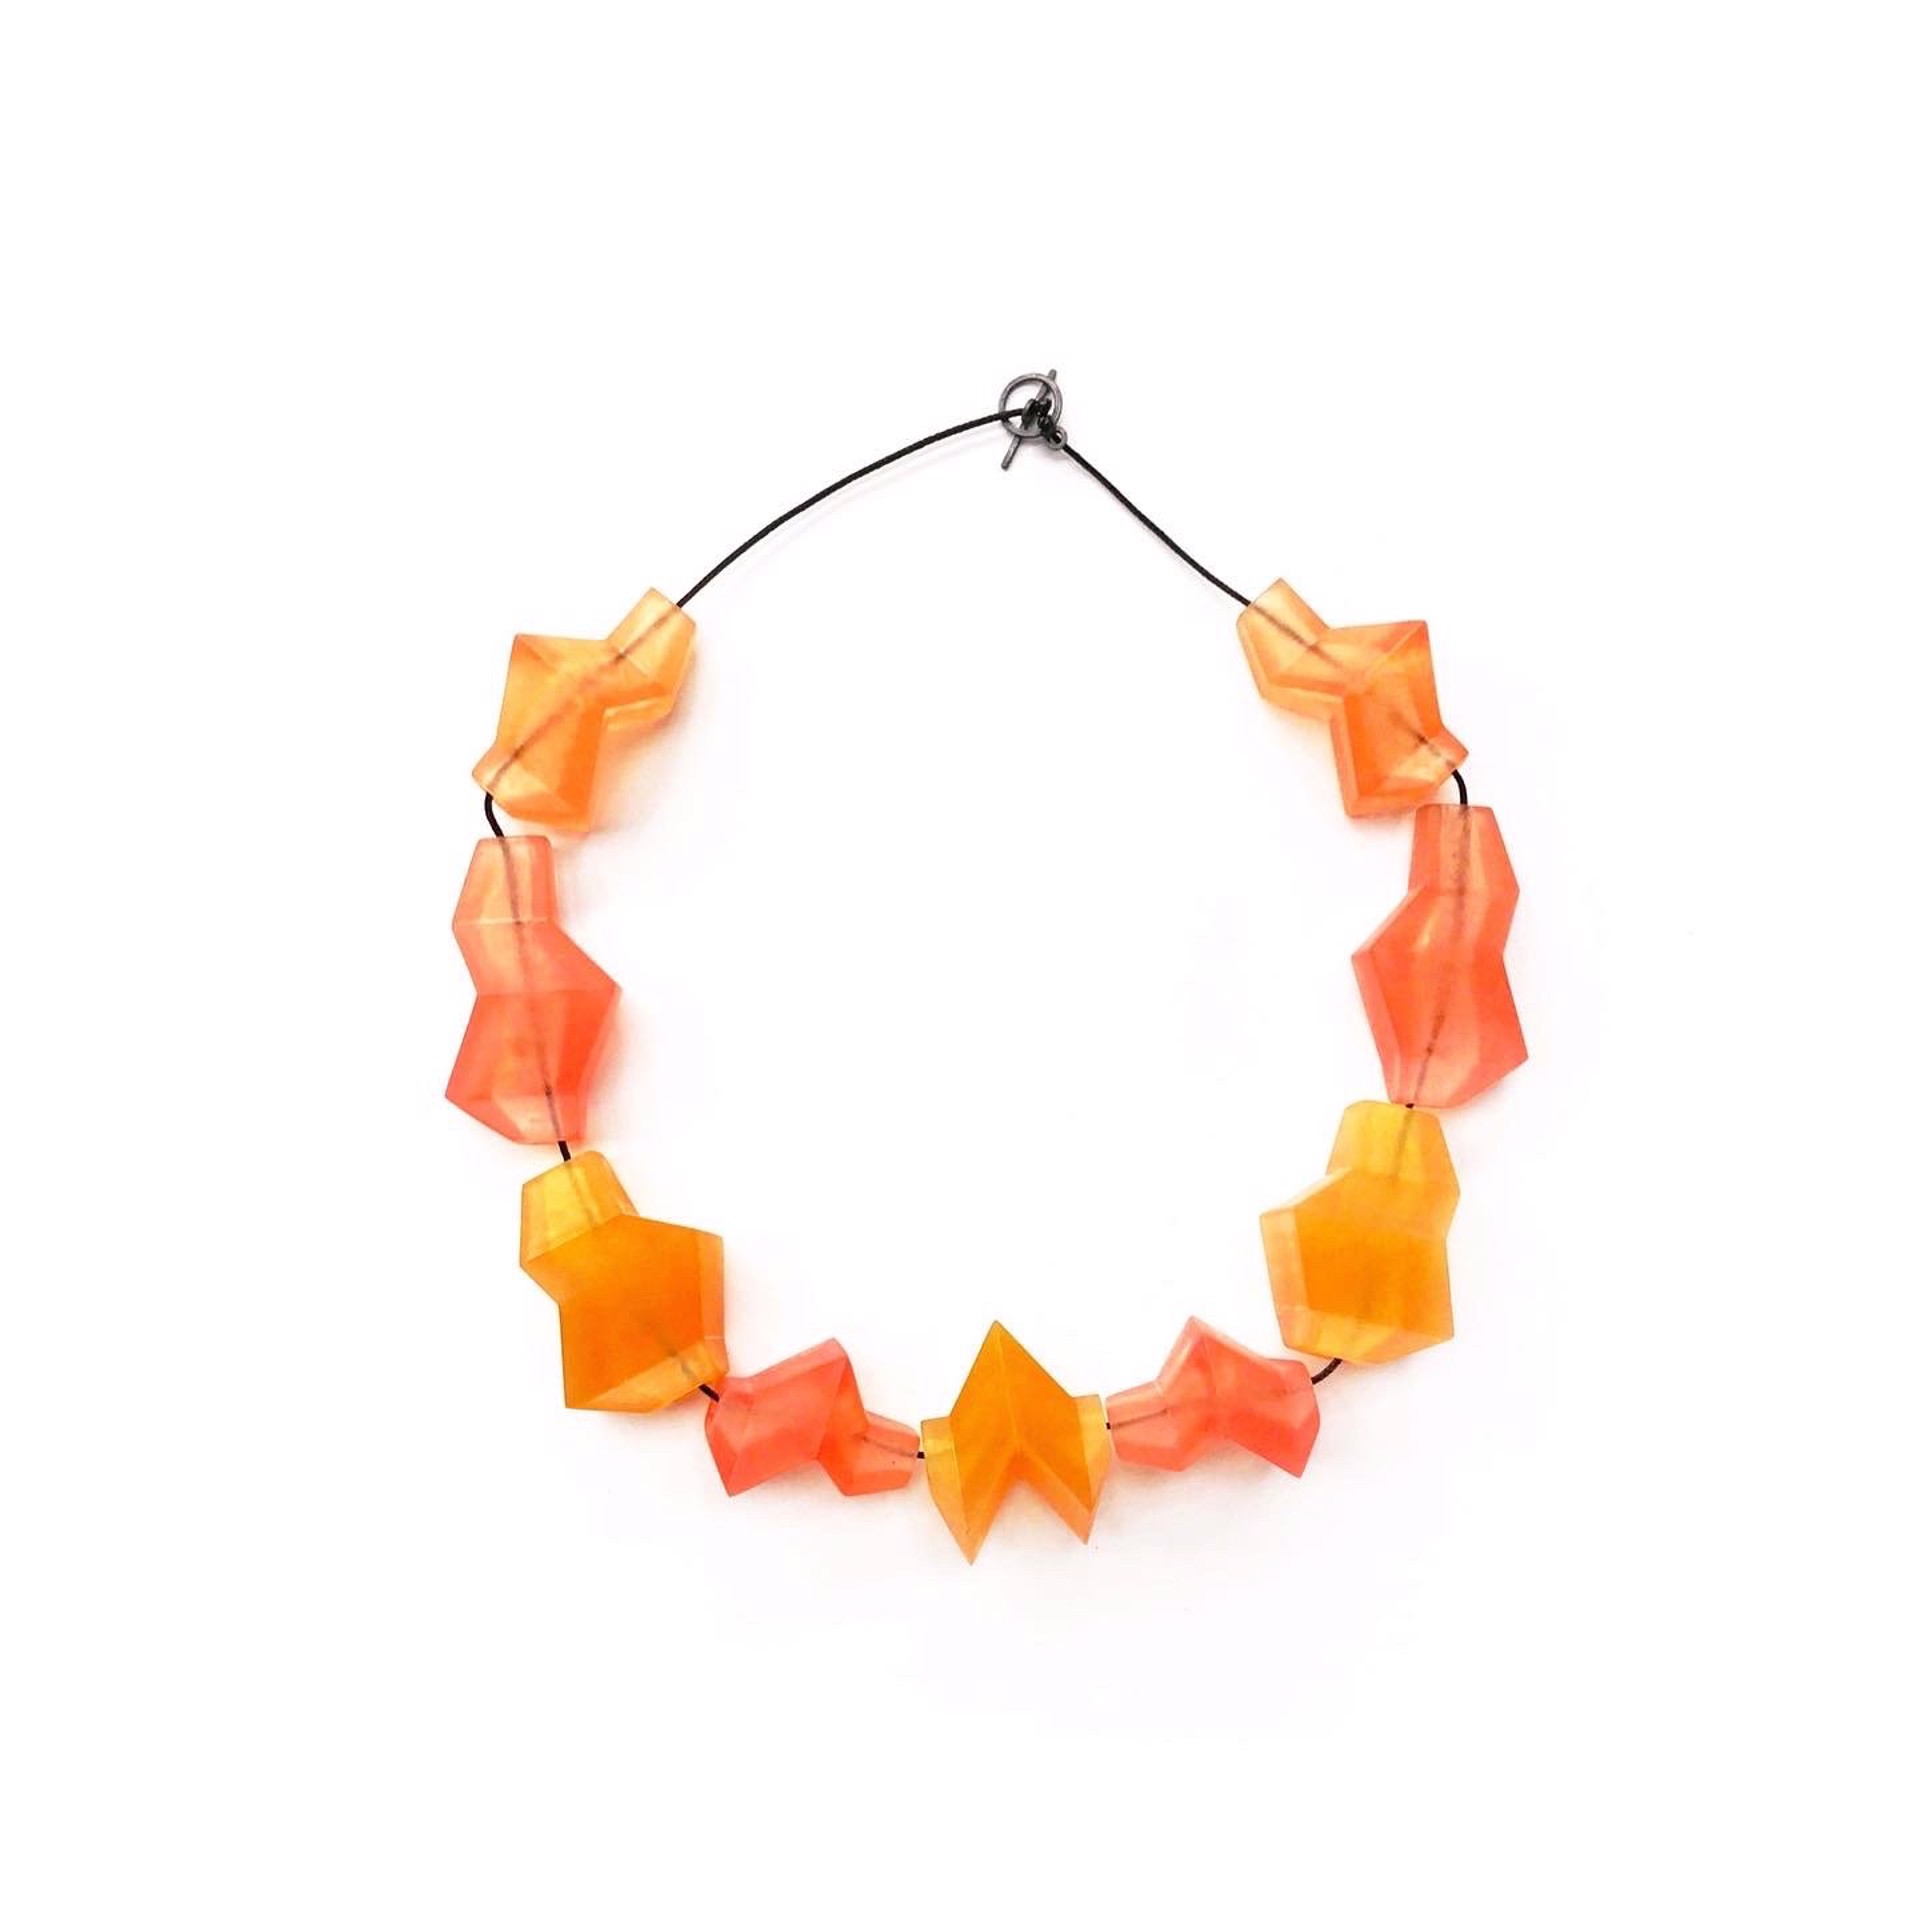 Necklace by Juan Fried